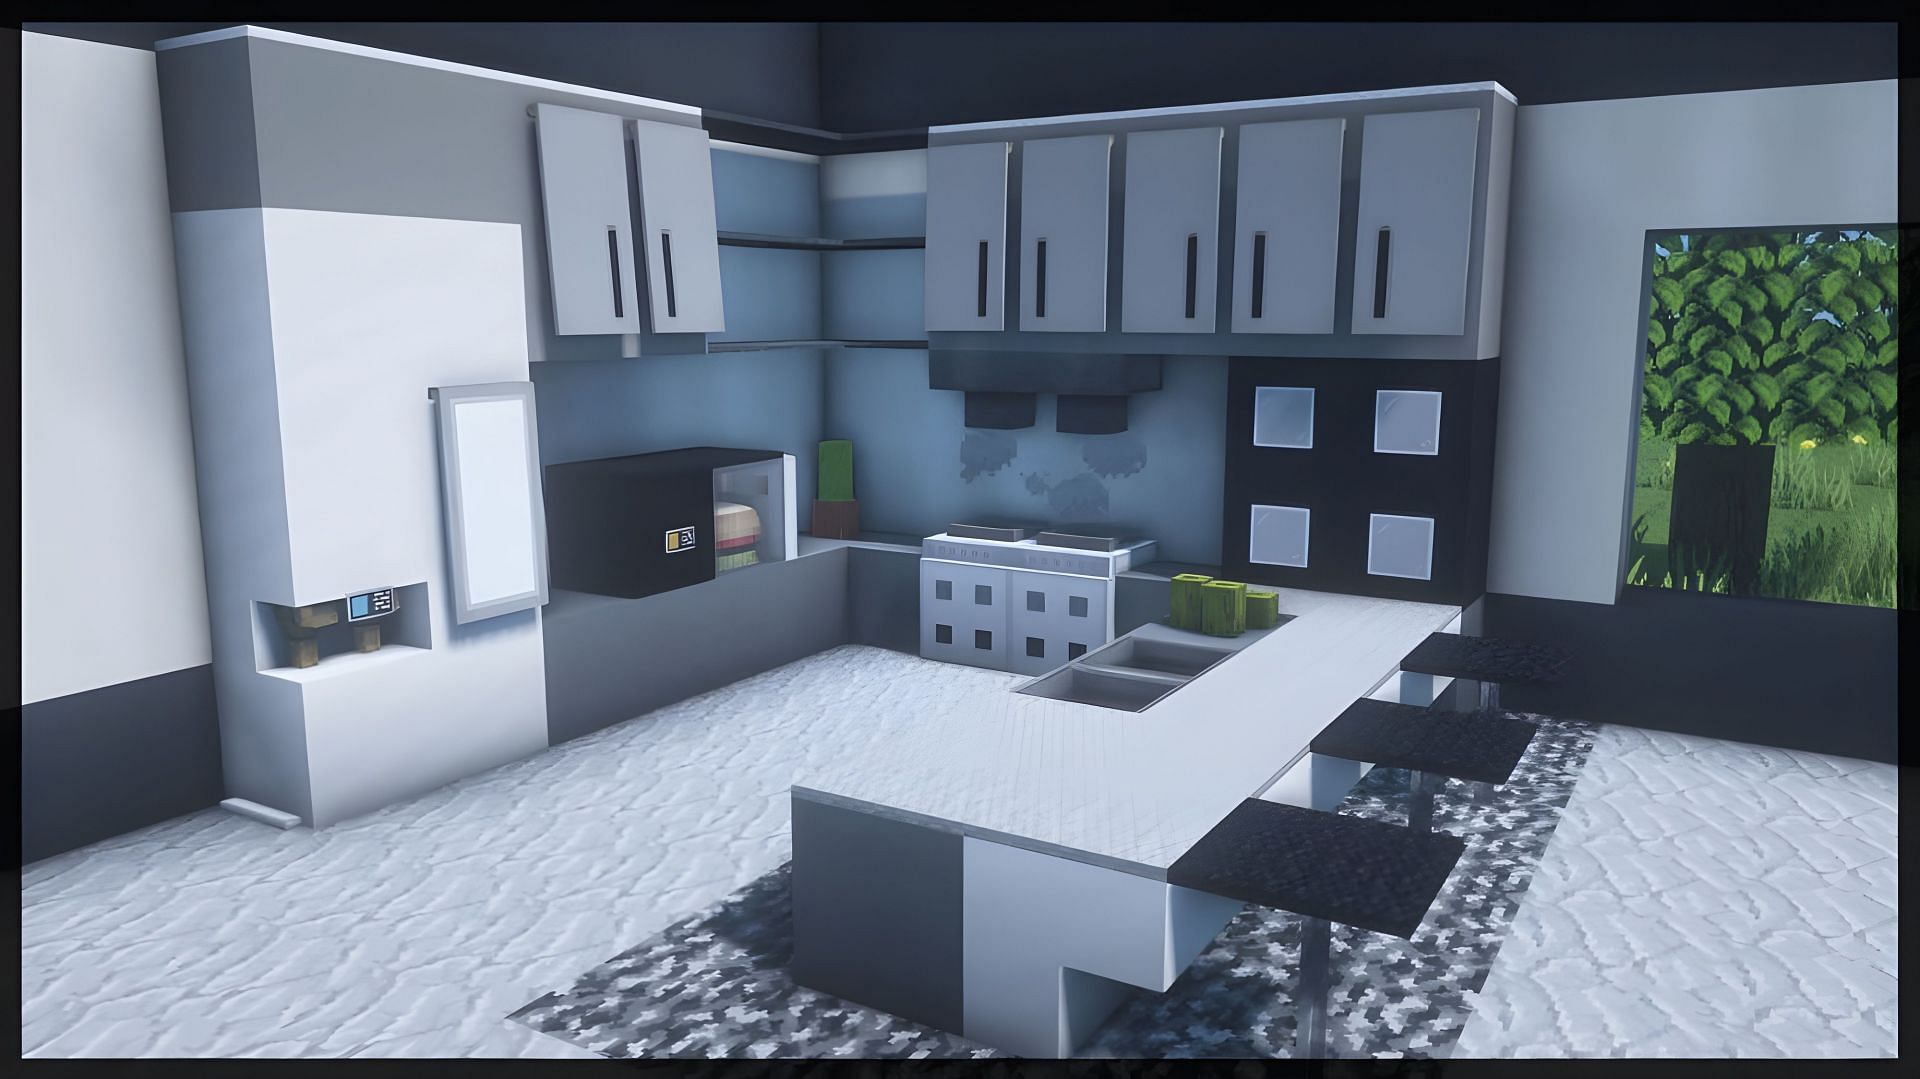 Kitchens are an essential part of a Minecraft home (Image via Youtube/MCram)